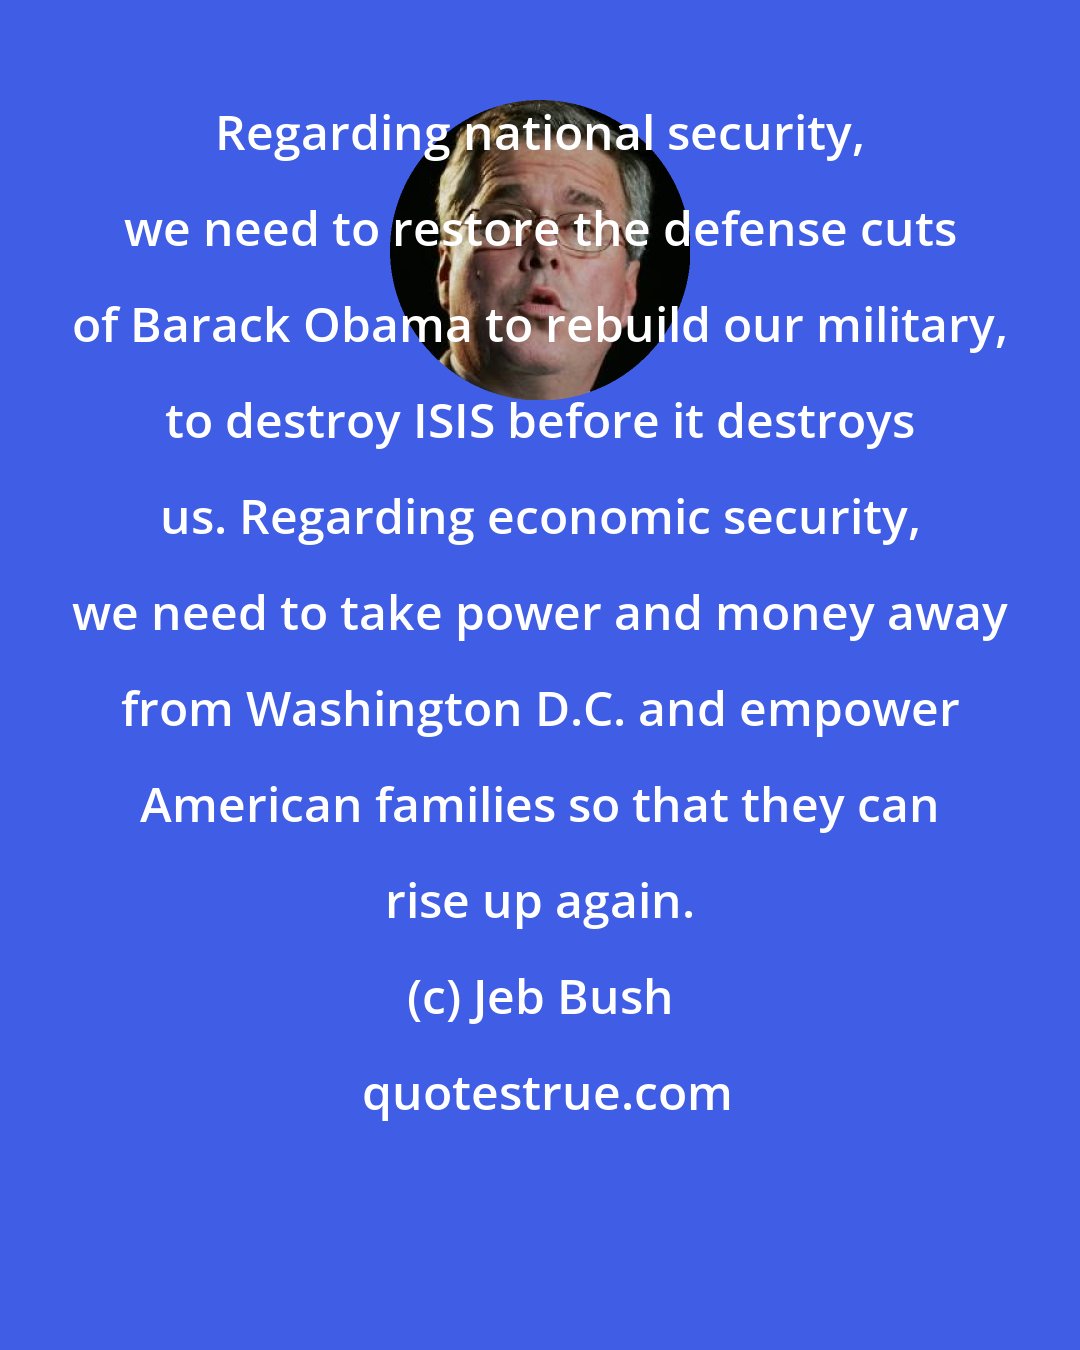 Jeb Bush: Regarding national security, we need to restore the defense cuts of Barack Obama to rebuild our military, to destroy ISIS before it destroys us. Regarding economic security, we need to take power and money away from Washington D.C. and empower American families so that they can rise up again.